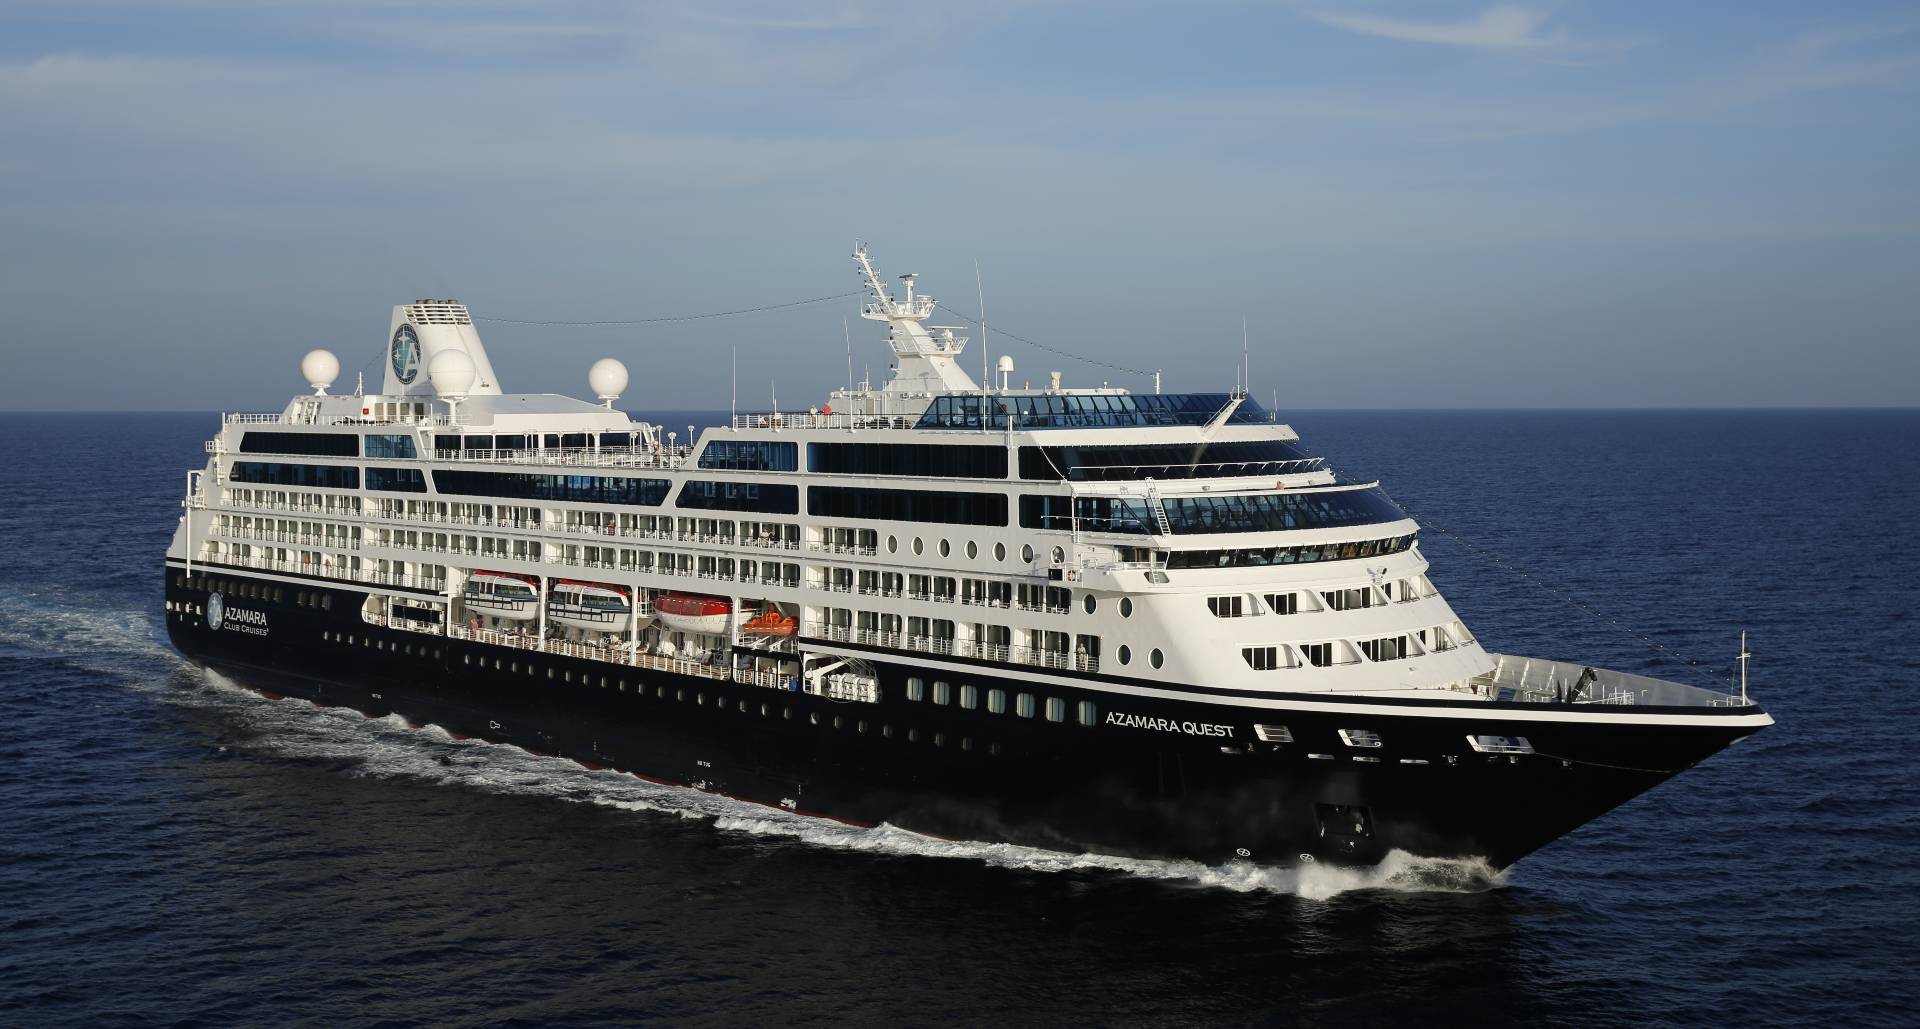 Azamara Signs Retail Partnership With Starboard Cruise Services 